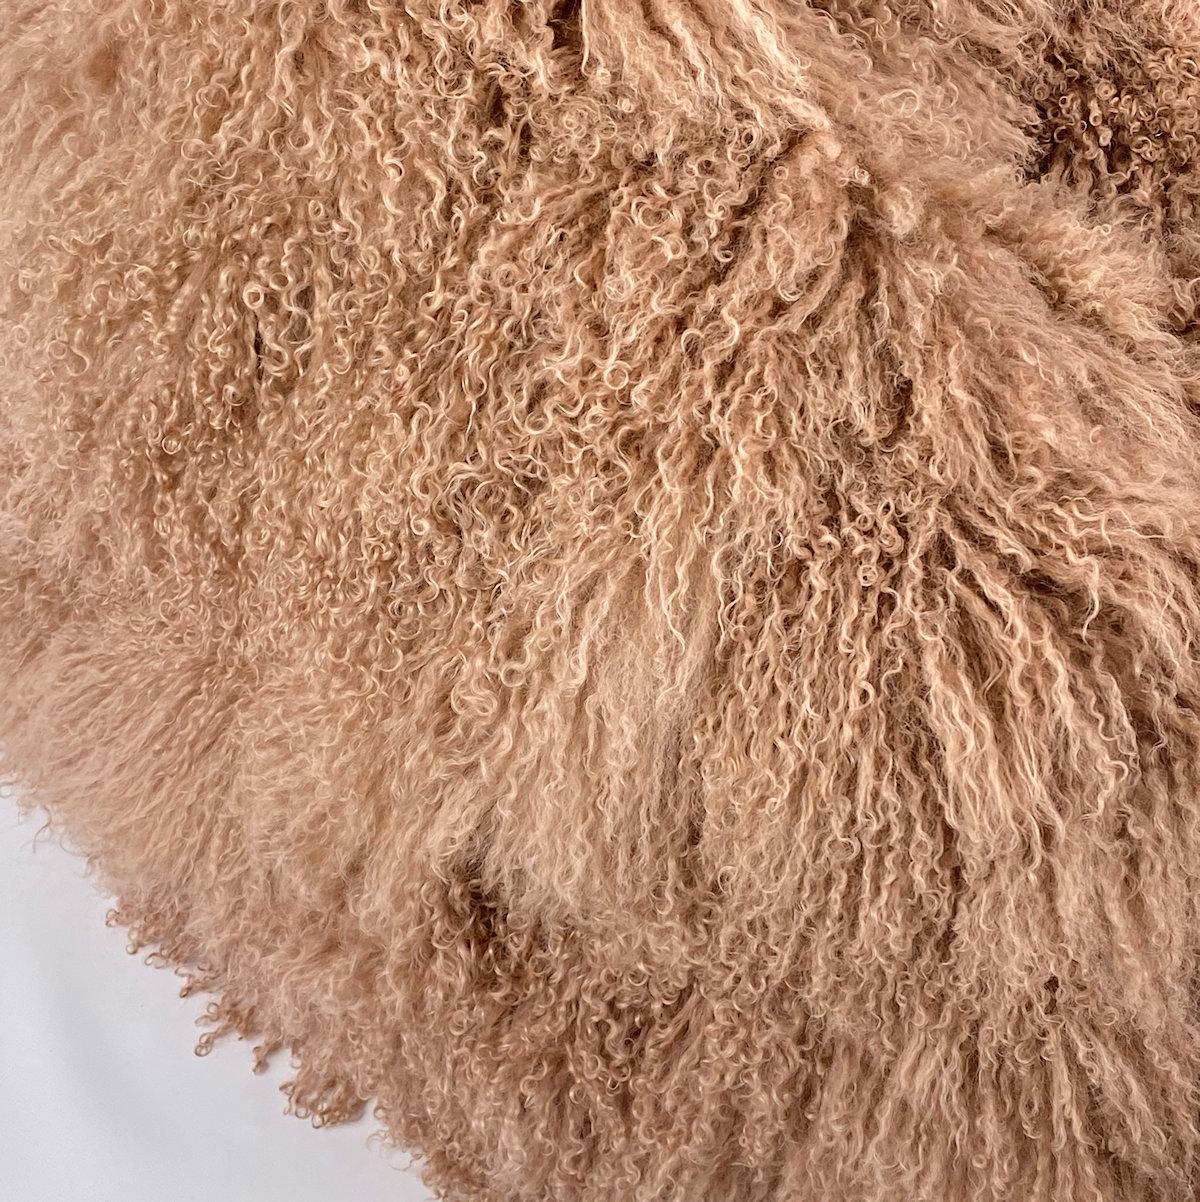 From gentle softness to perfectly tailored comfort, this rose gold, pink fur bean bag cover brings kids luxury comfort to life. The bean bag chair cover is crafted from high quality Mongolian sheepskin featuring an irresistible crimped and curly